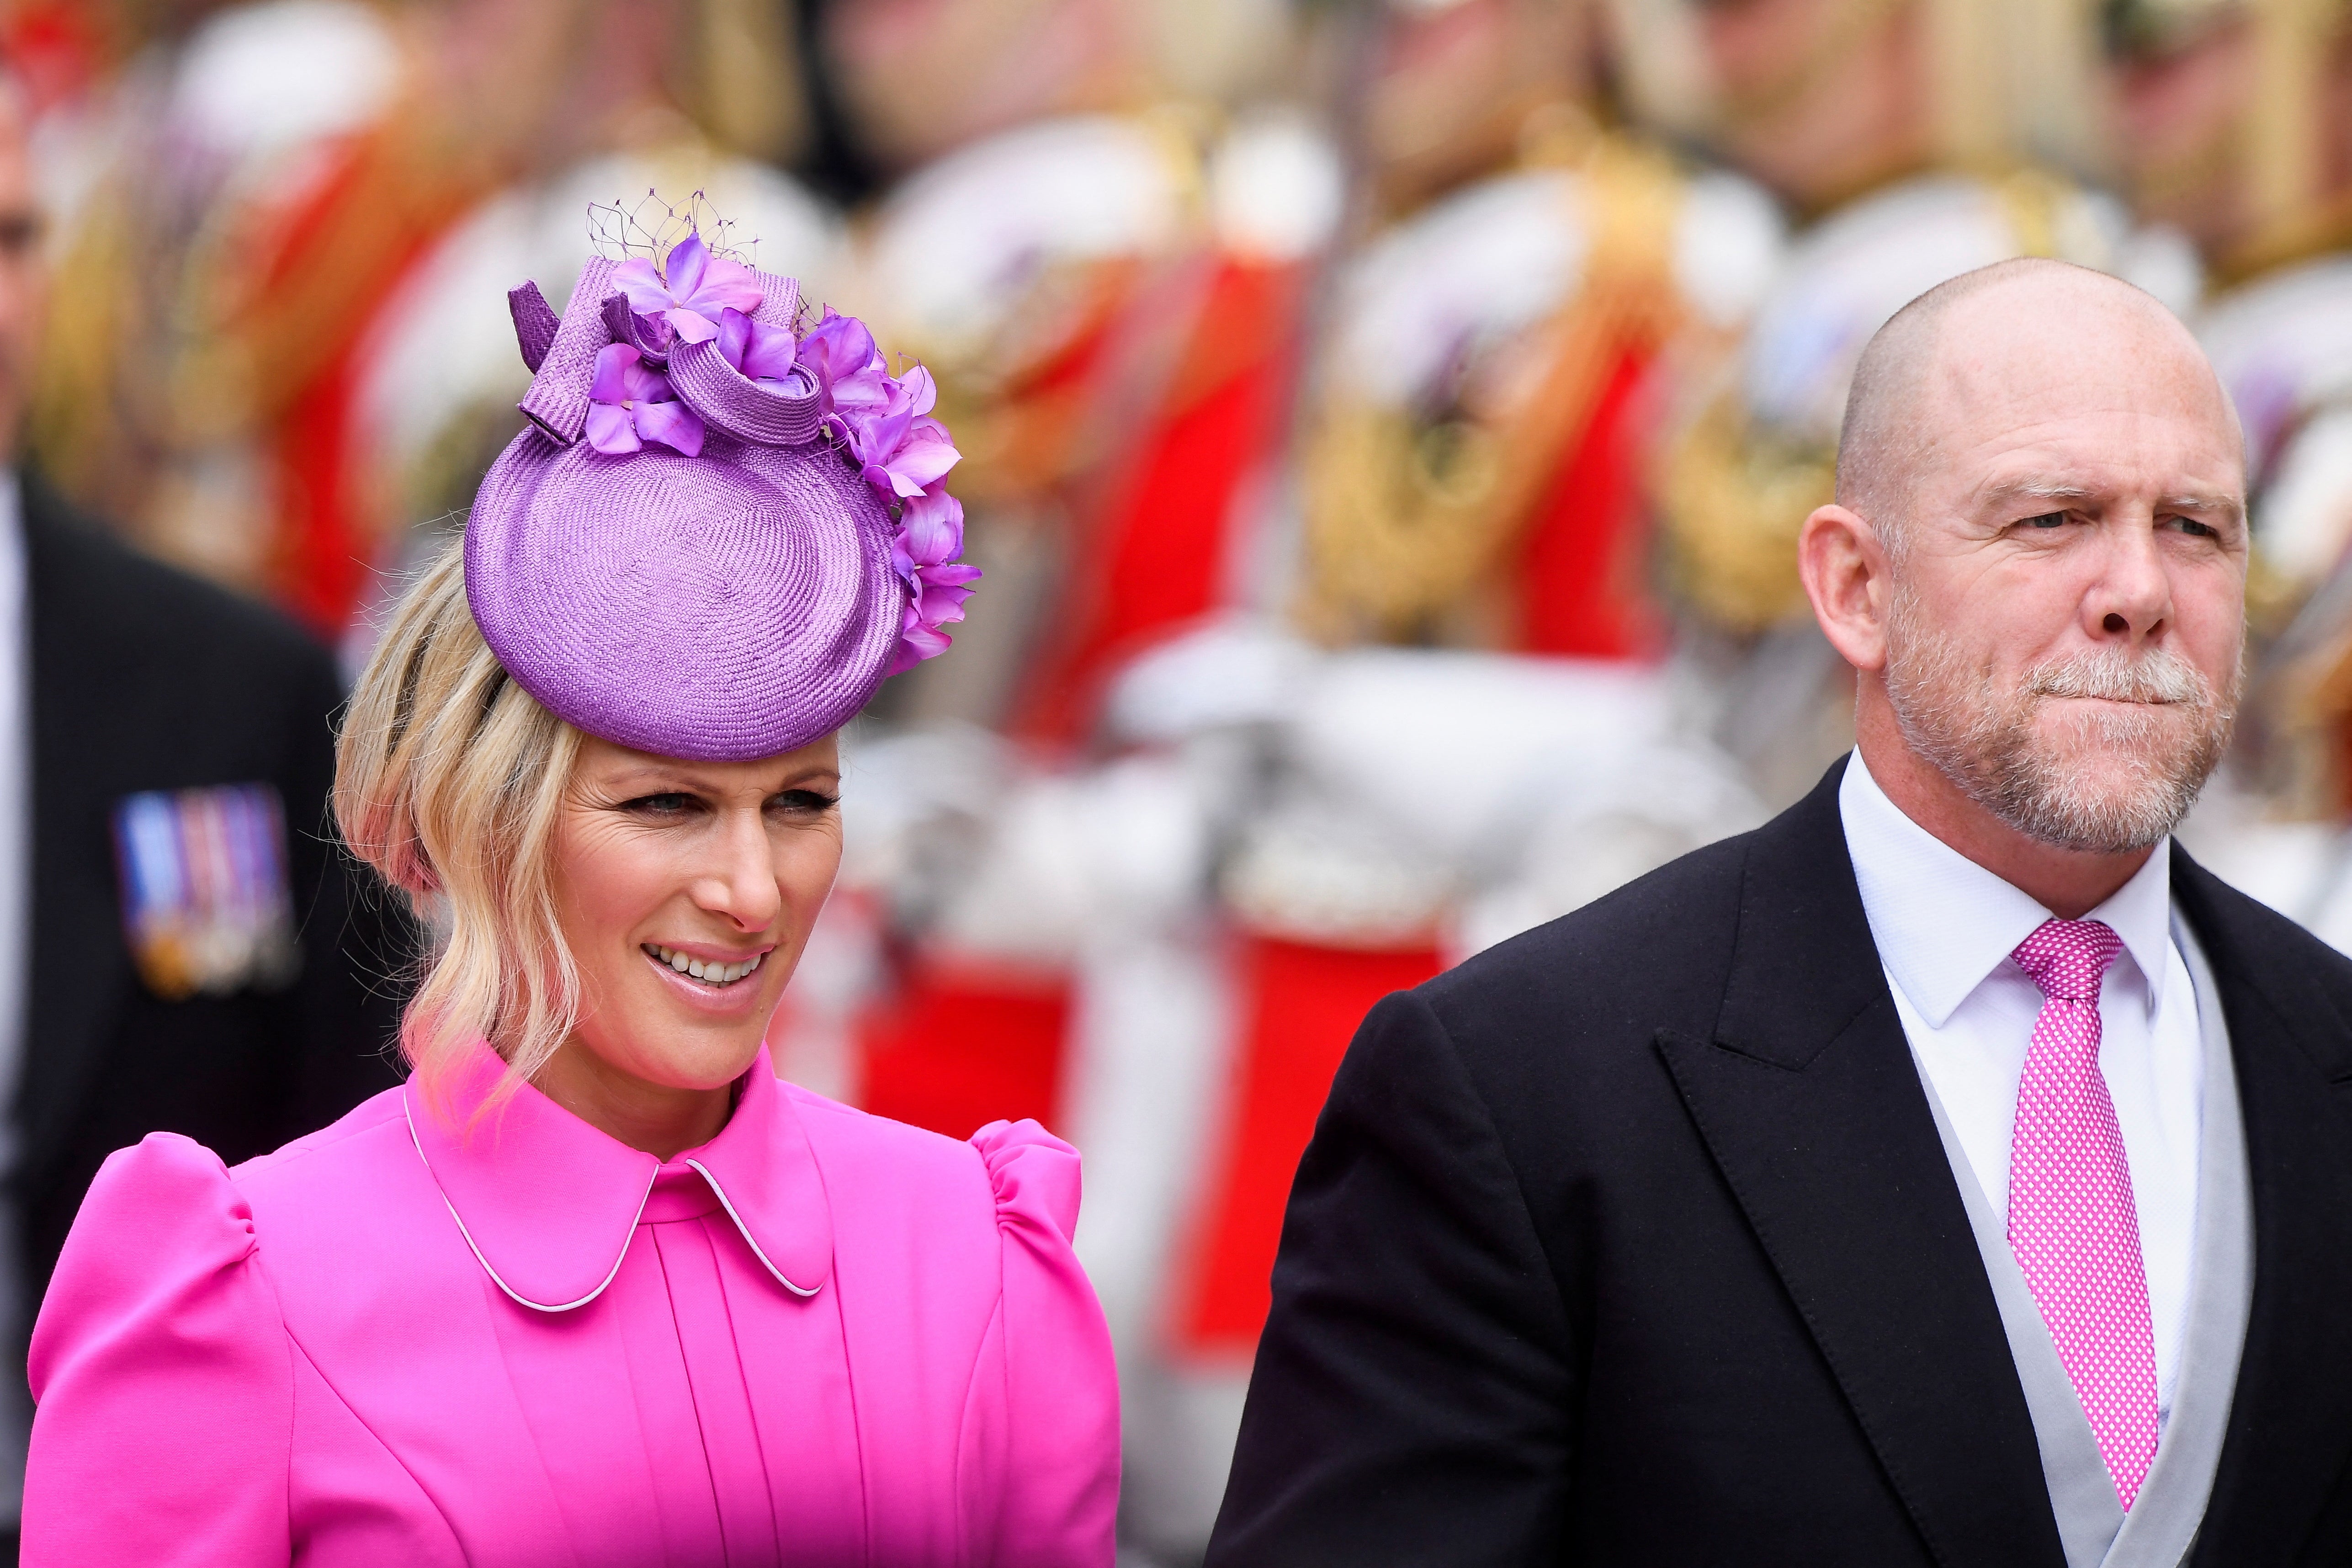 Mike Tindall with wife Zara who he says was deeply upset by the death of her grandmother (Toby Melville/PA)